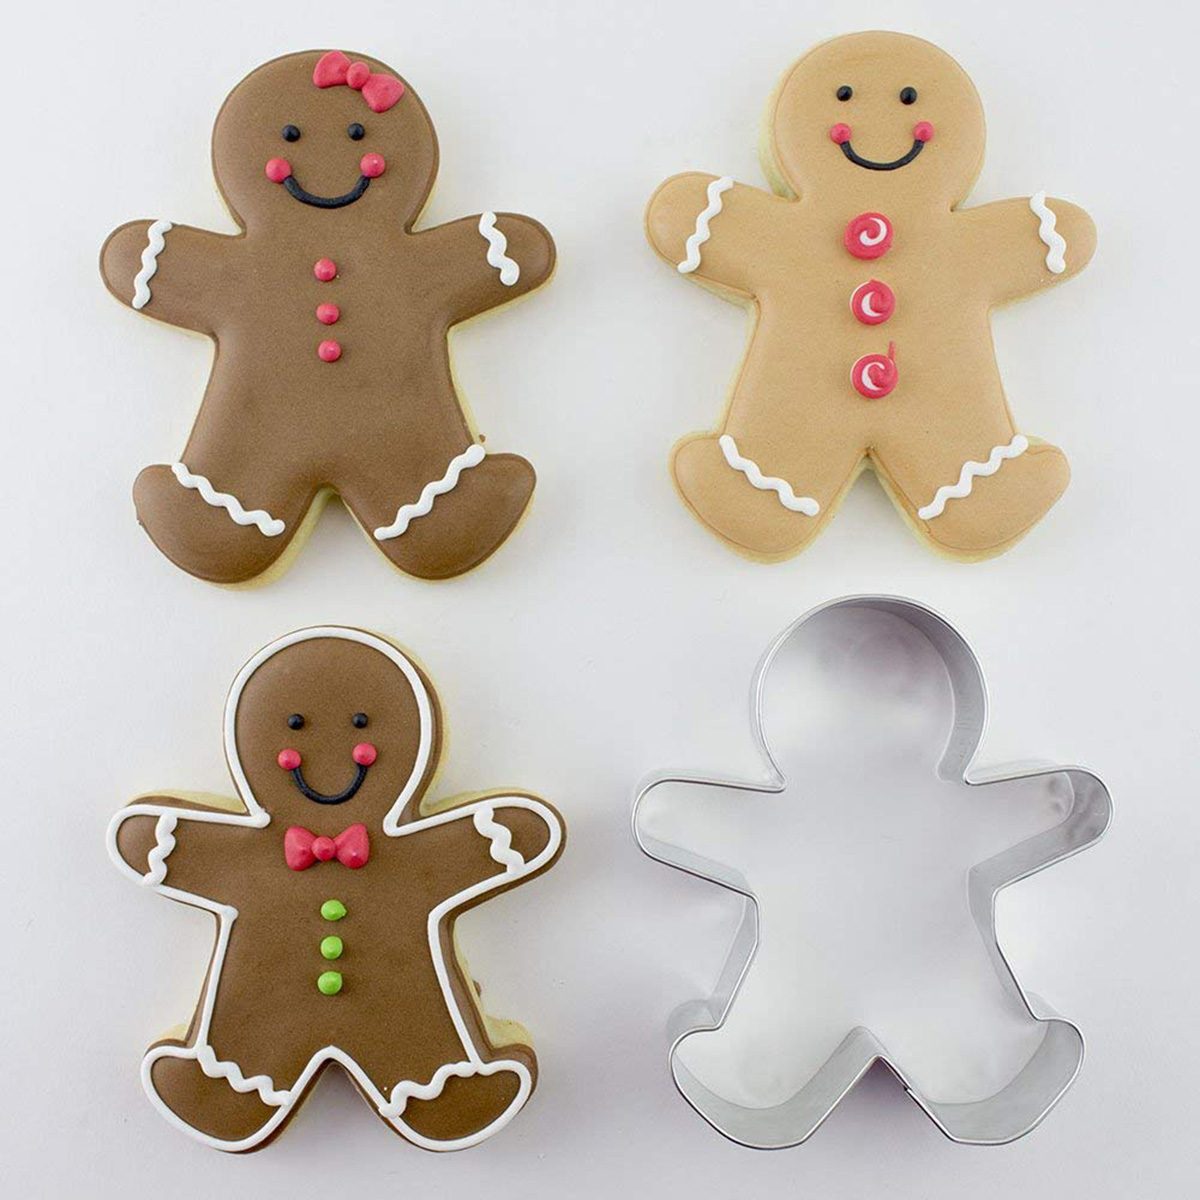 Basic Cookie Decorating Supplies  Basic cookies, Cookie decorating supplies,  Christmas cookies decorated